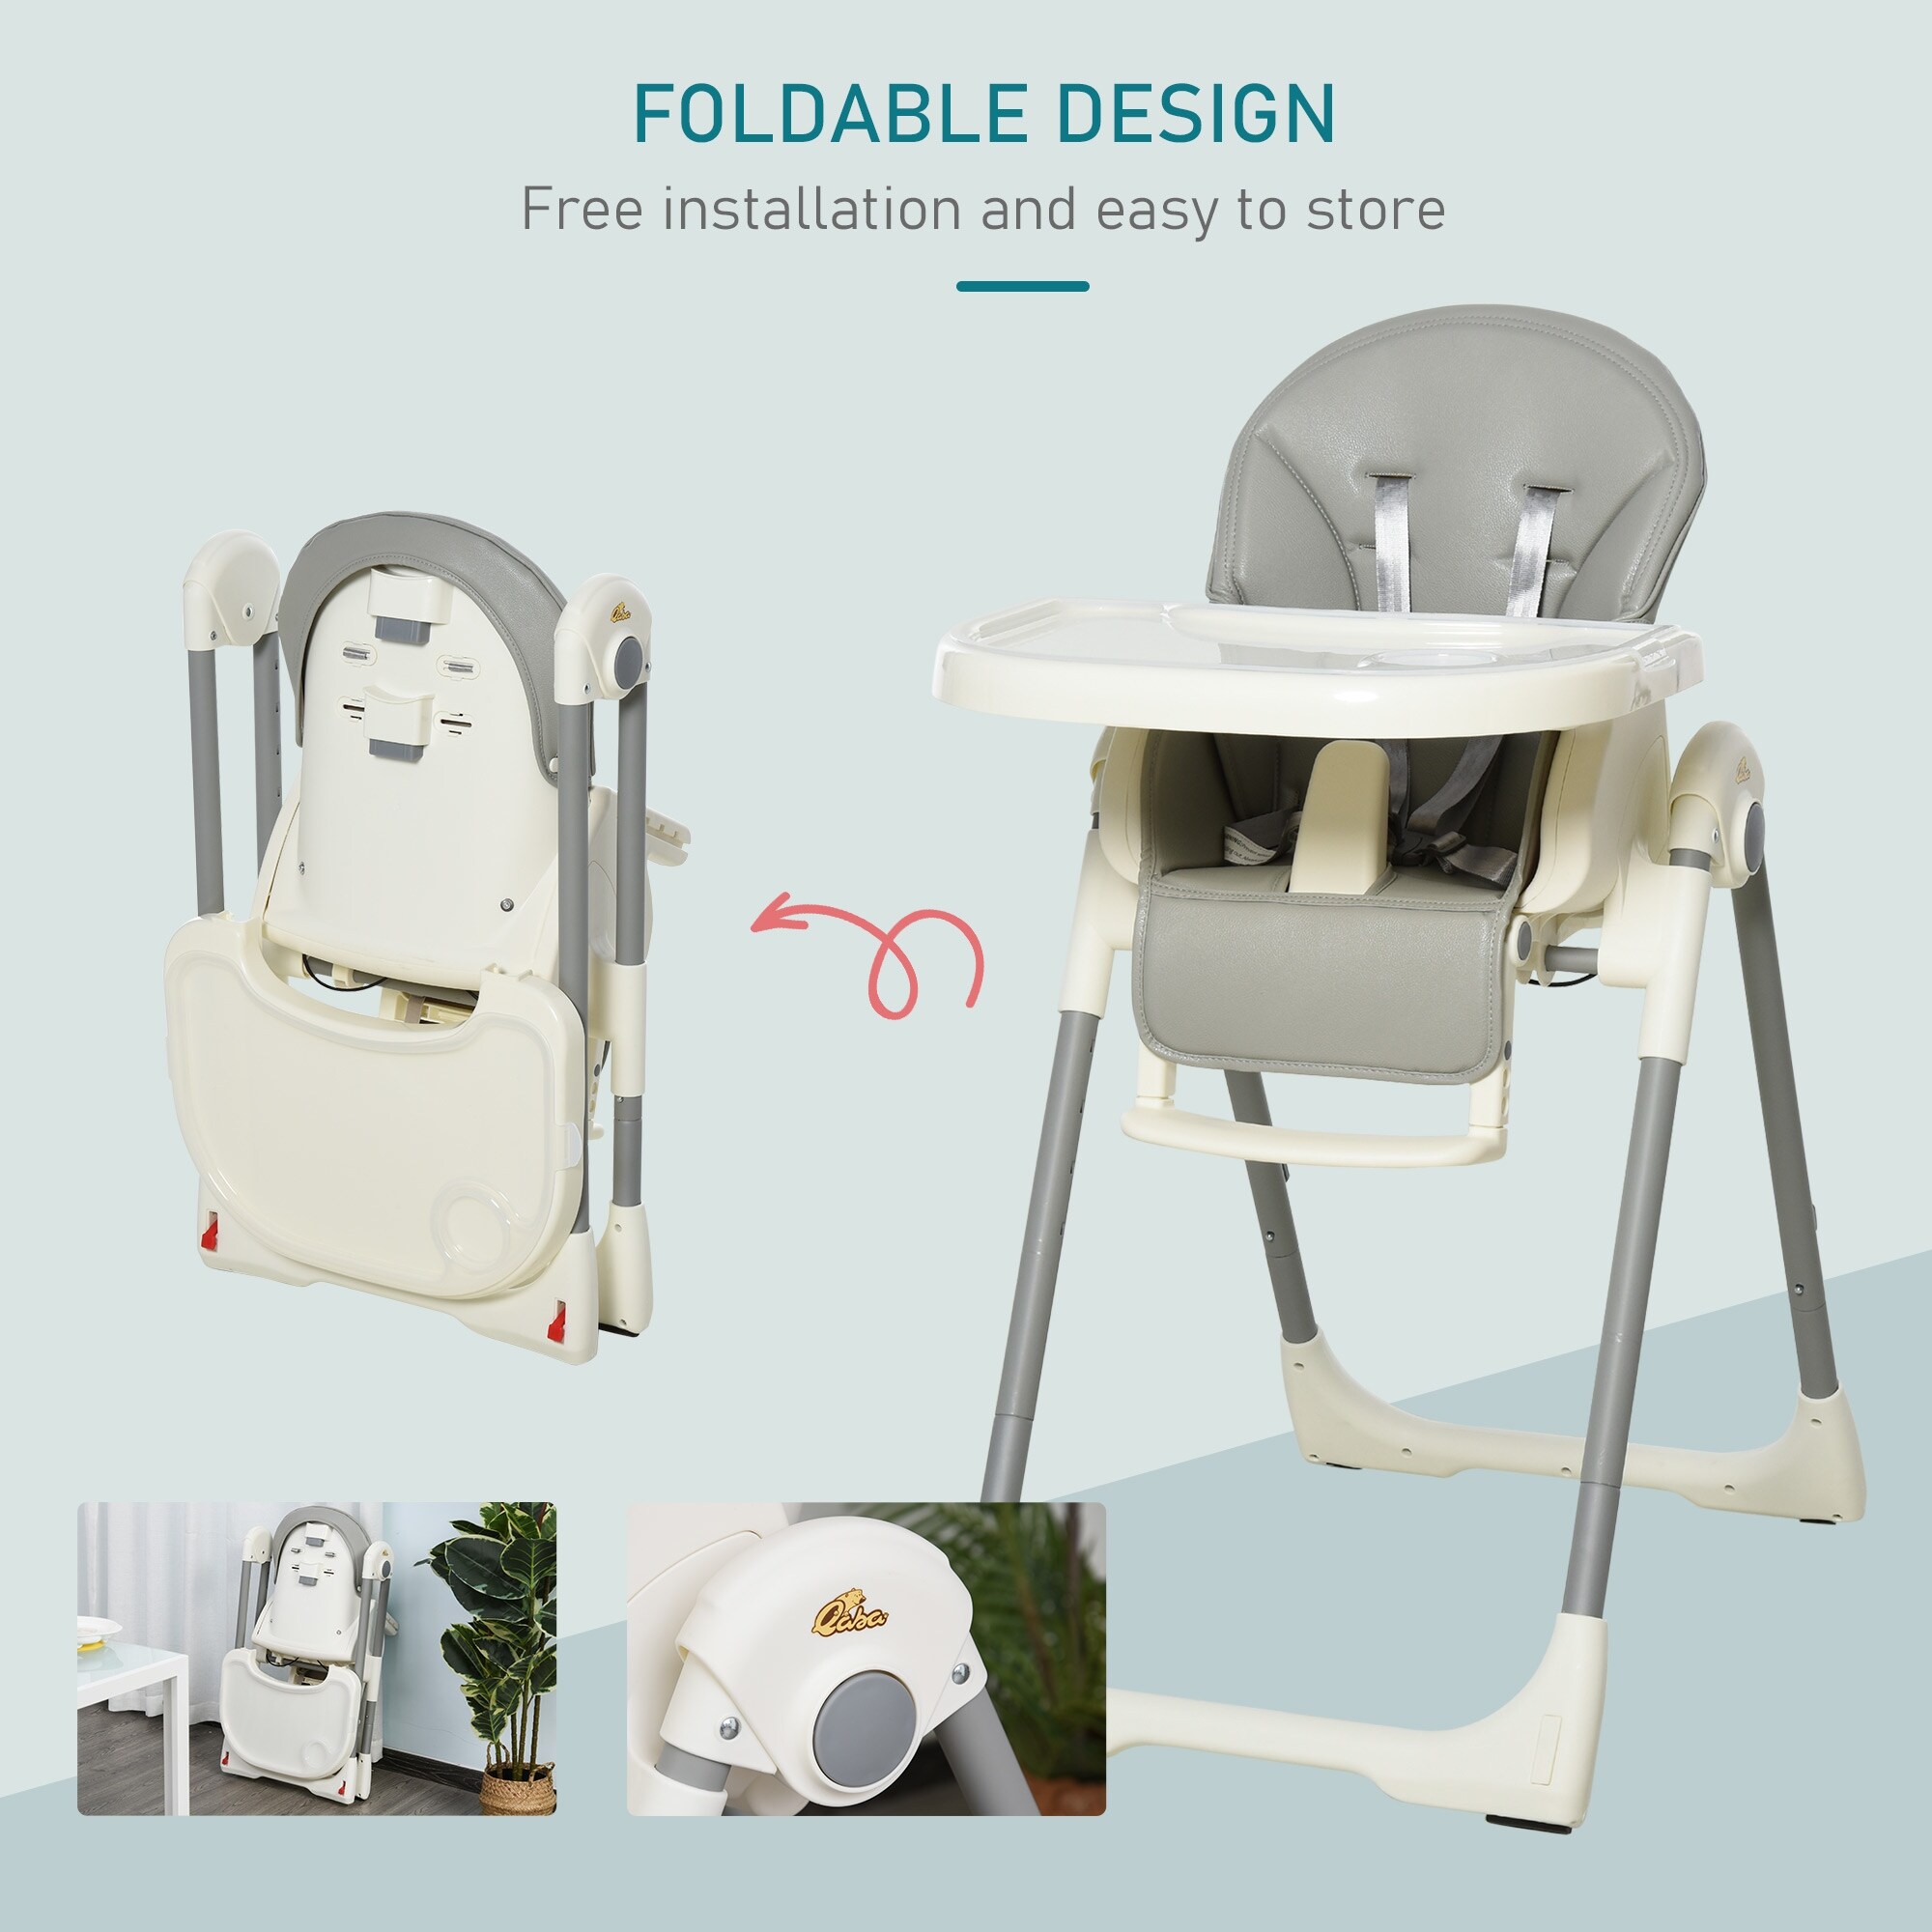 Qaba Foldable Baby Convertible High Chair With Adjustable Backrest Footrest Removable Tray A 5 Point Harness Grey Overstock 32458332